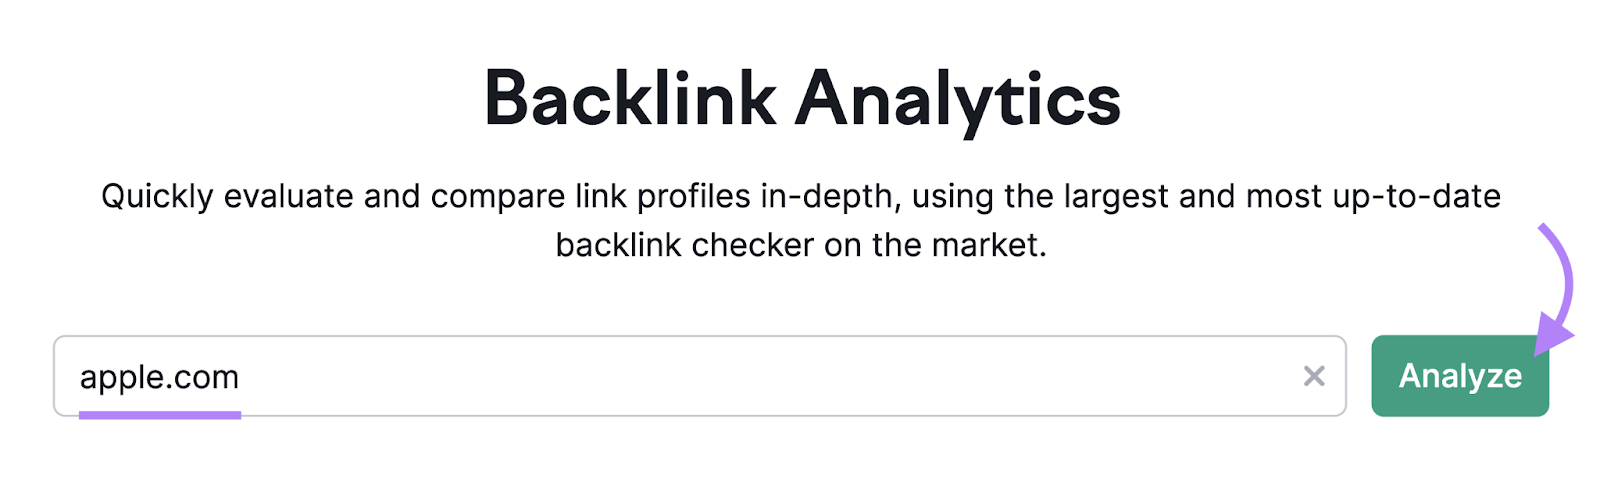 Backlink Analytics tool search for apple.com